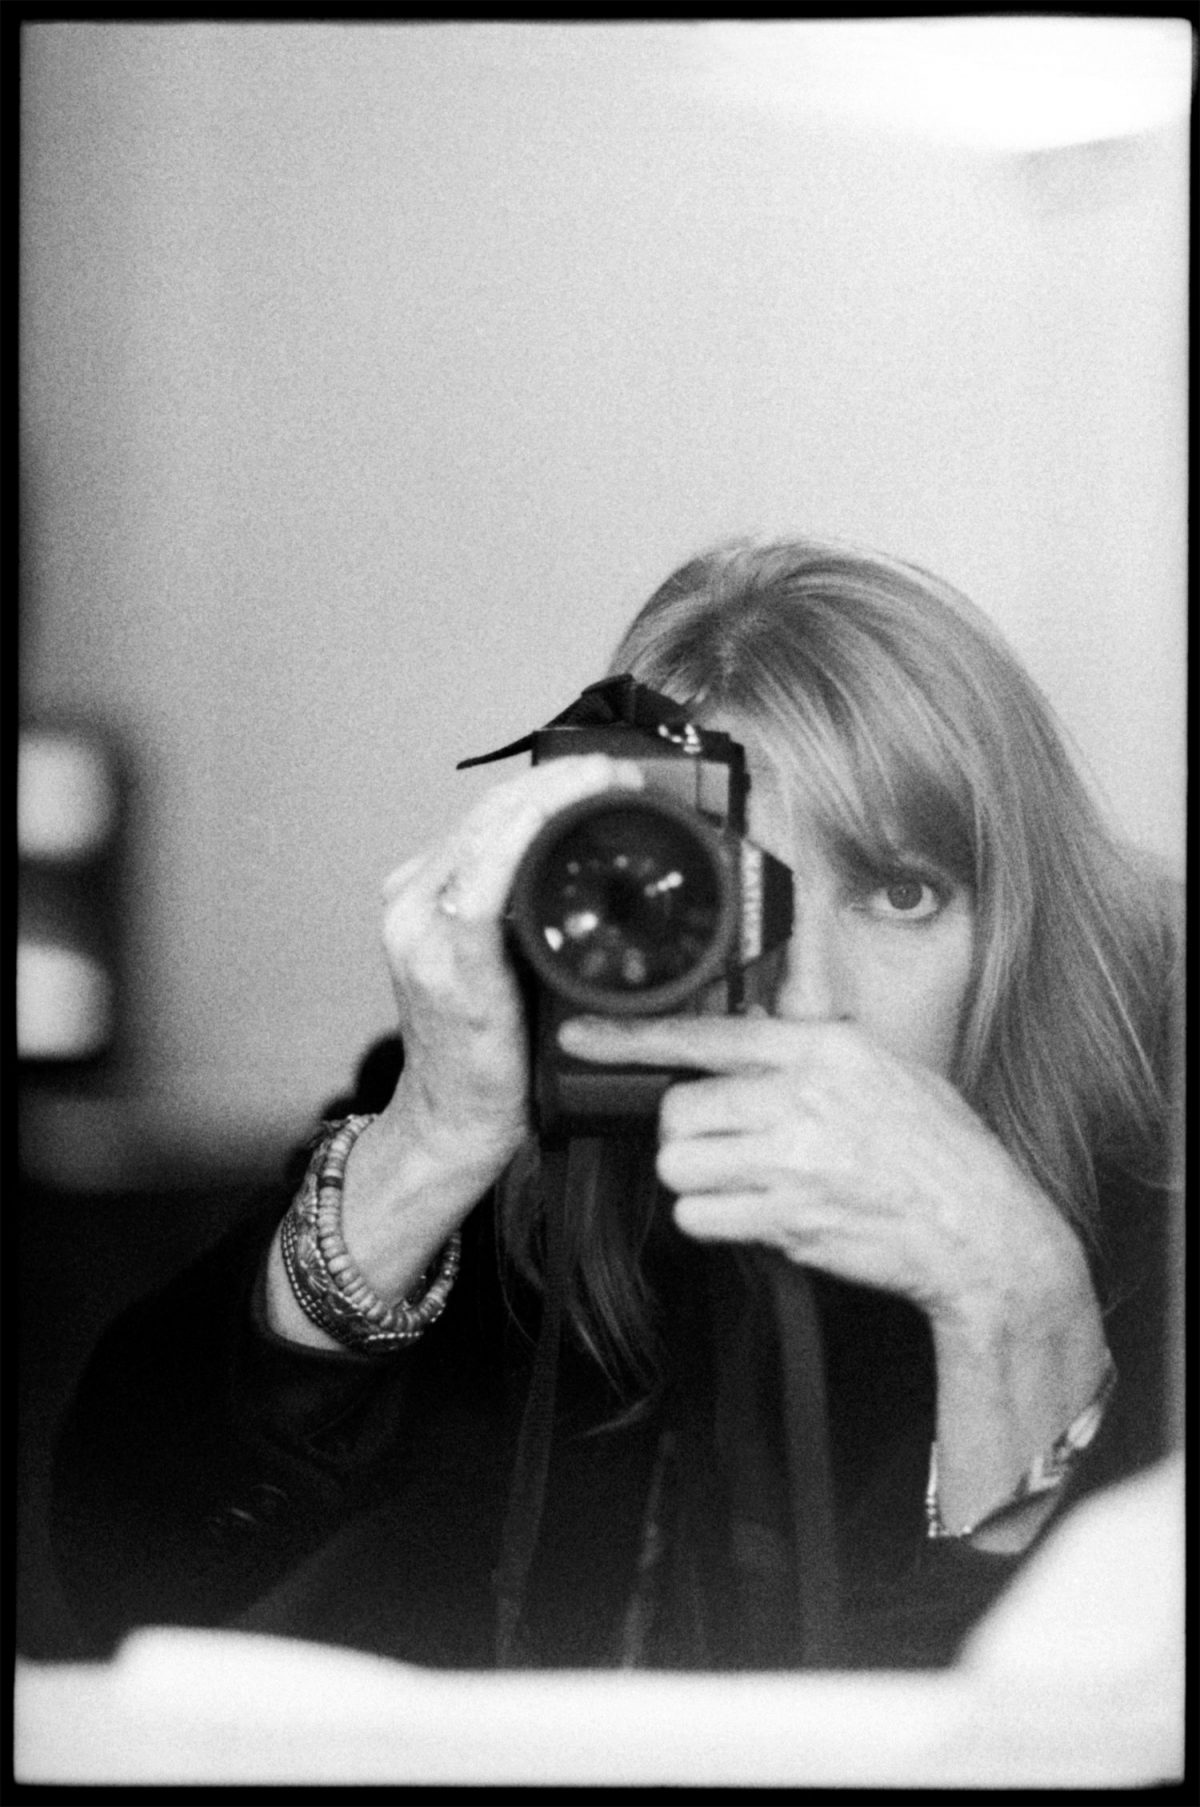 Linda McCartney, and her Photographs of Paul, The Beatles and Other Artists  pic